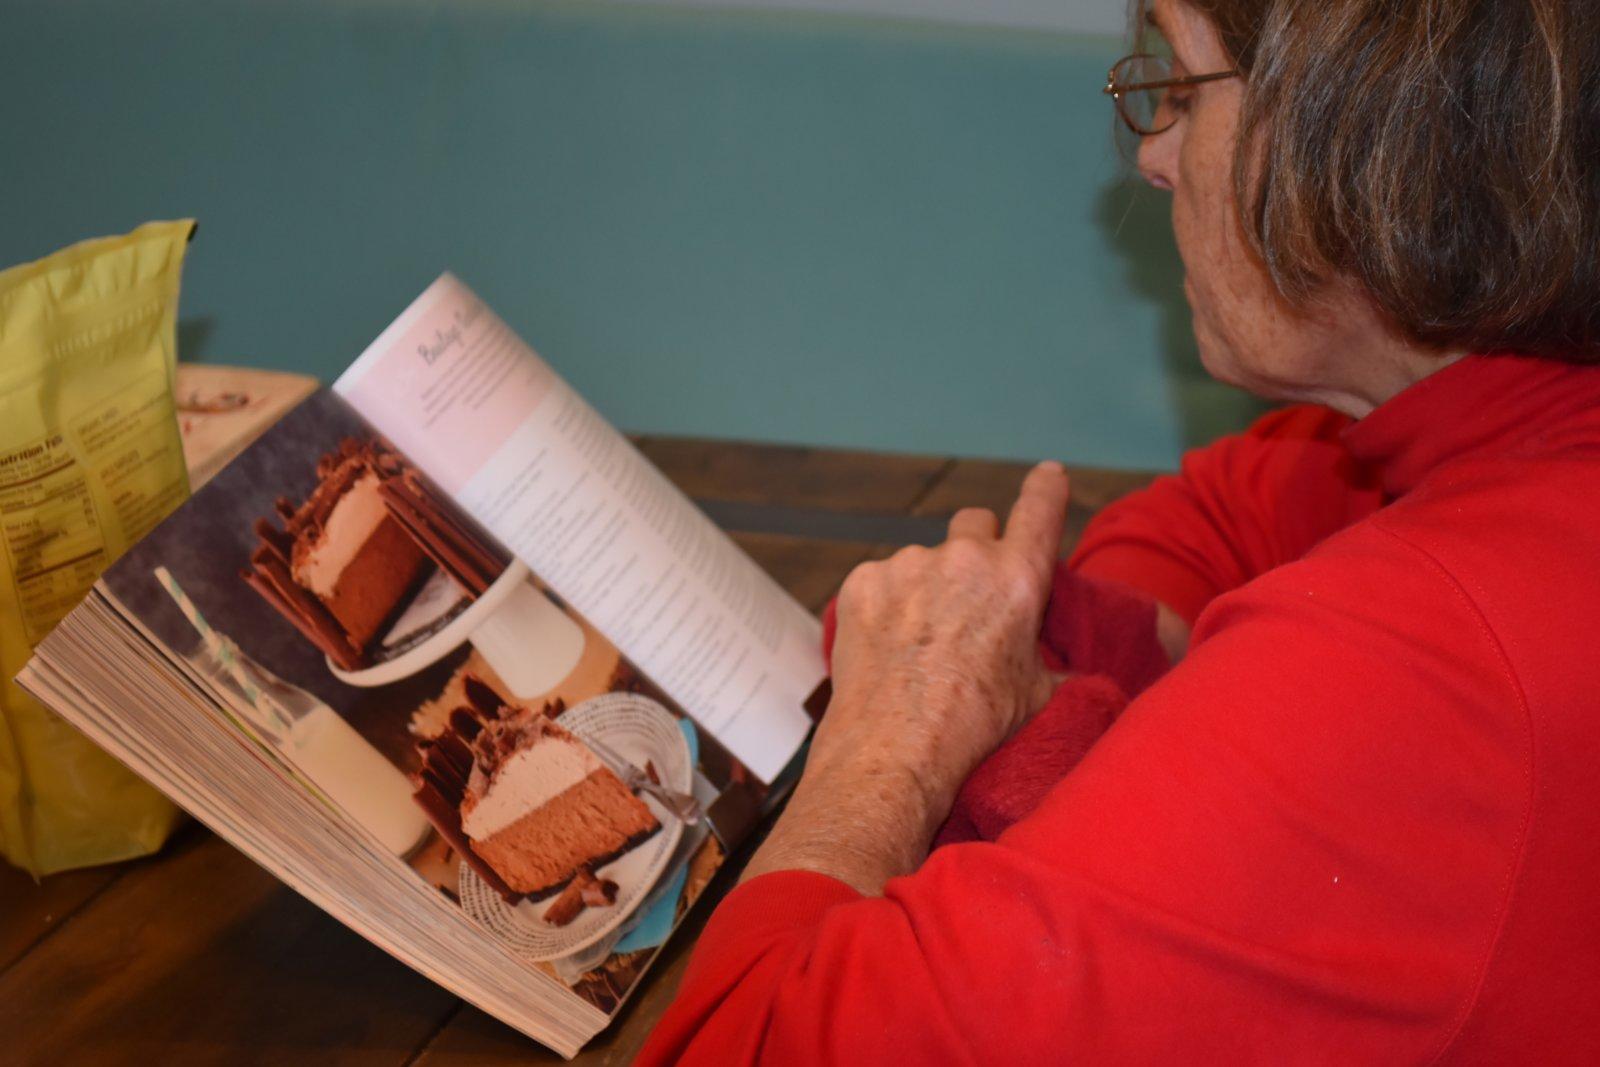 Nonni reading up on the recipes.